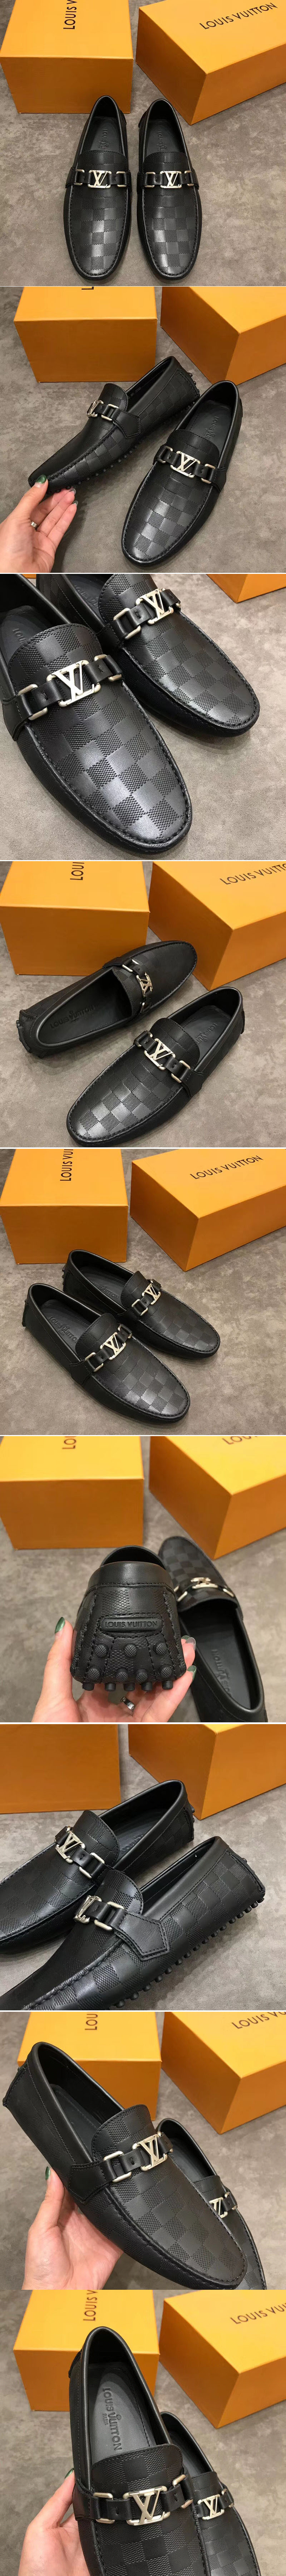 Replica Louis Vuitton LV Hockenheim Loafer And Shoes Black Damier Embossed Calf leather